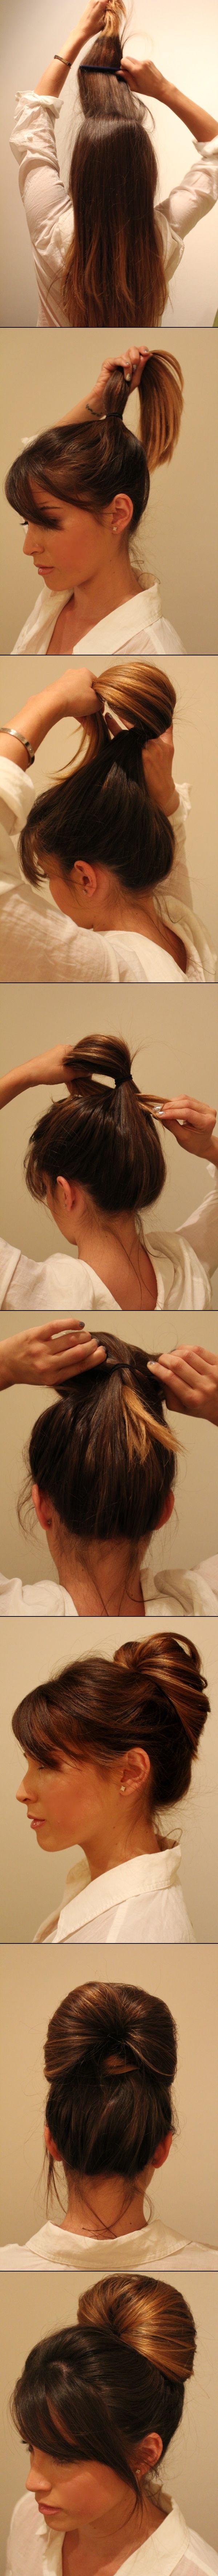 15 Easy Five-Minute Hairsdos That Will Transform Your Morning Routine